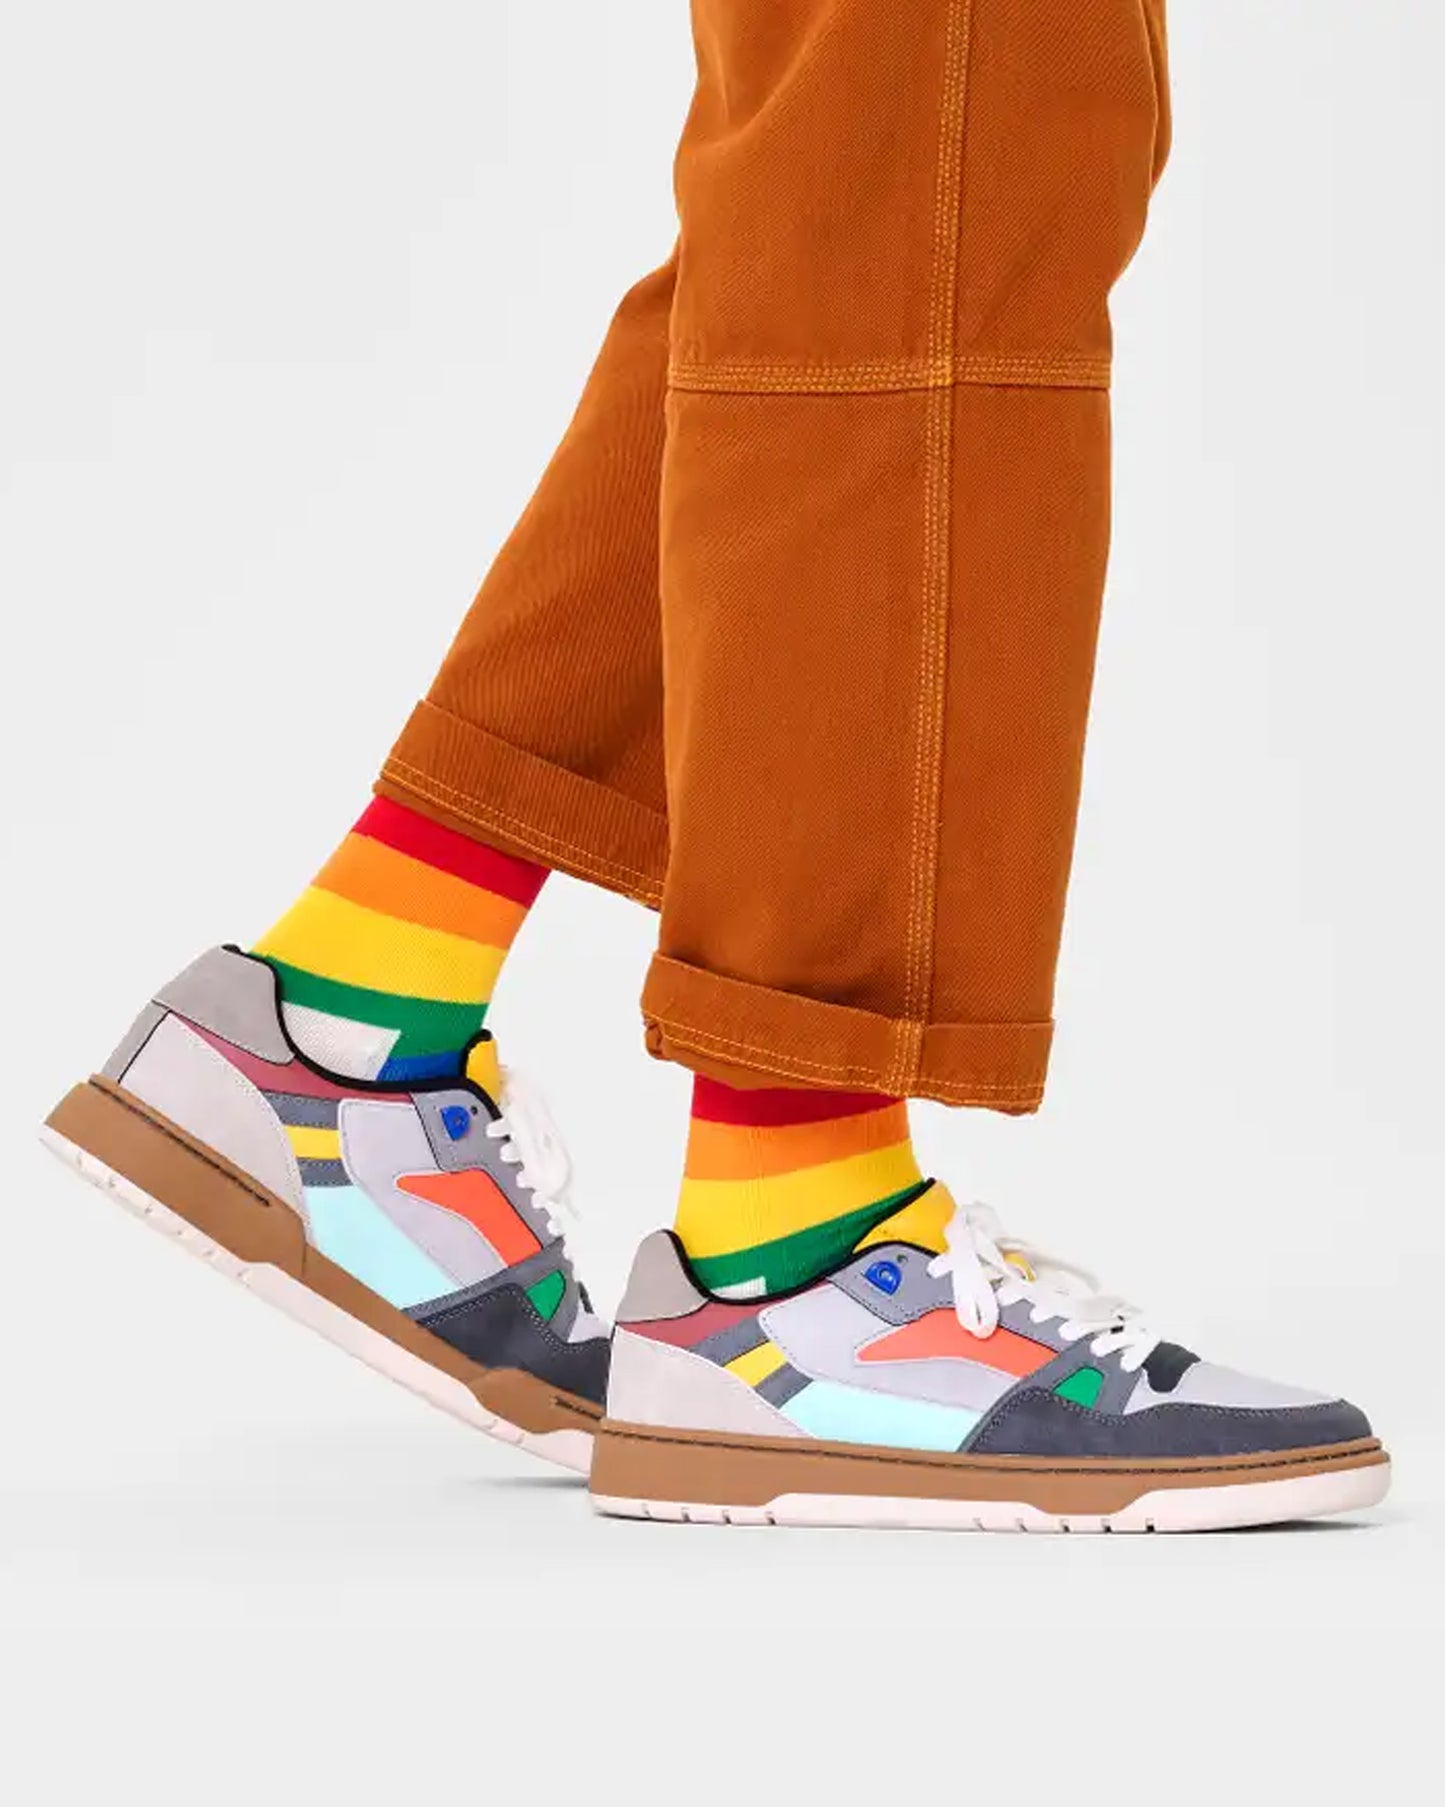 Happy Socks PRS01-0200 Pride Sock - Cream organic cotton crew length ankle socks with a horizontal LGBTQ+ rainbow stripe pattern. Worn with sneakers and orange trousers.